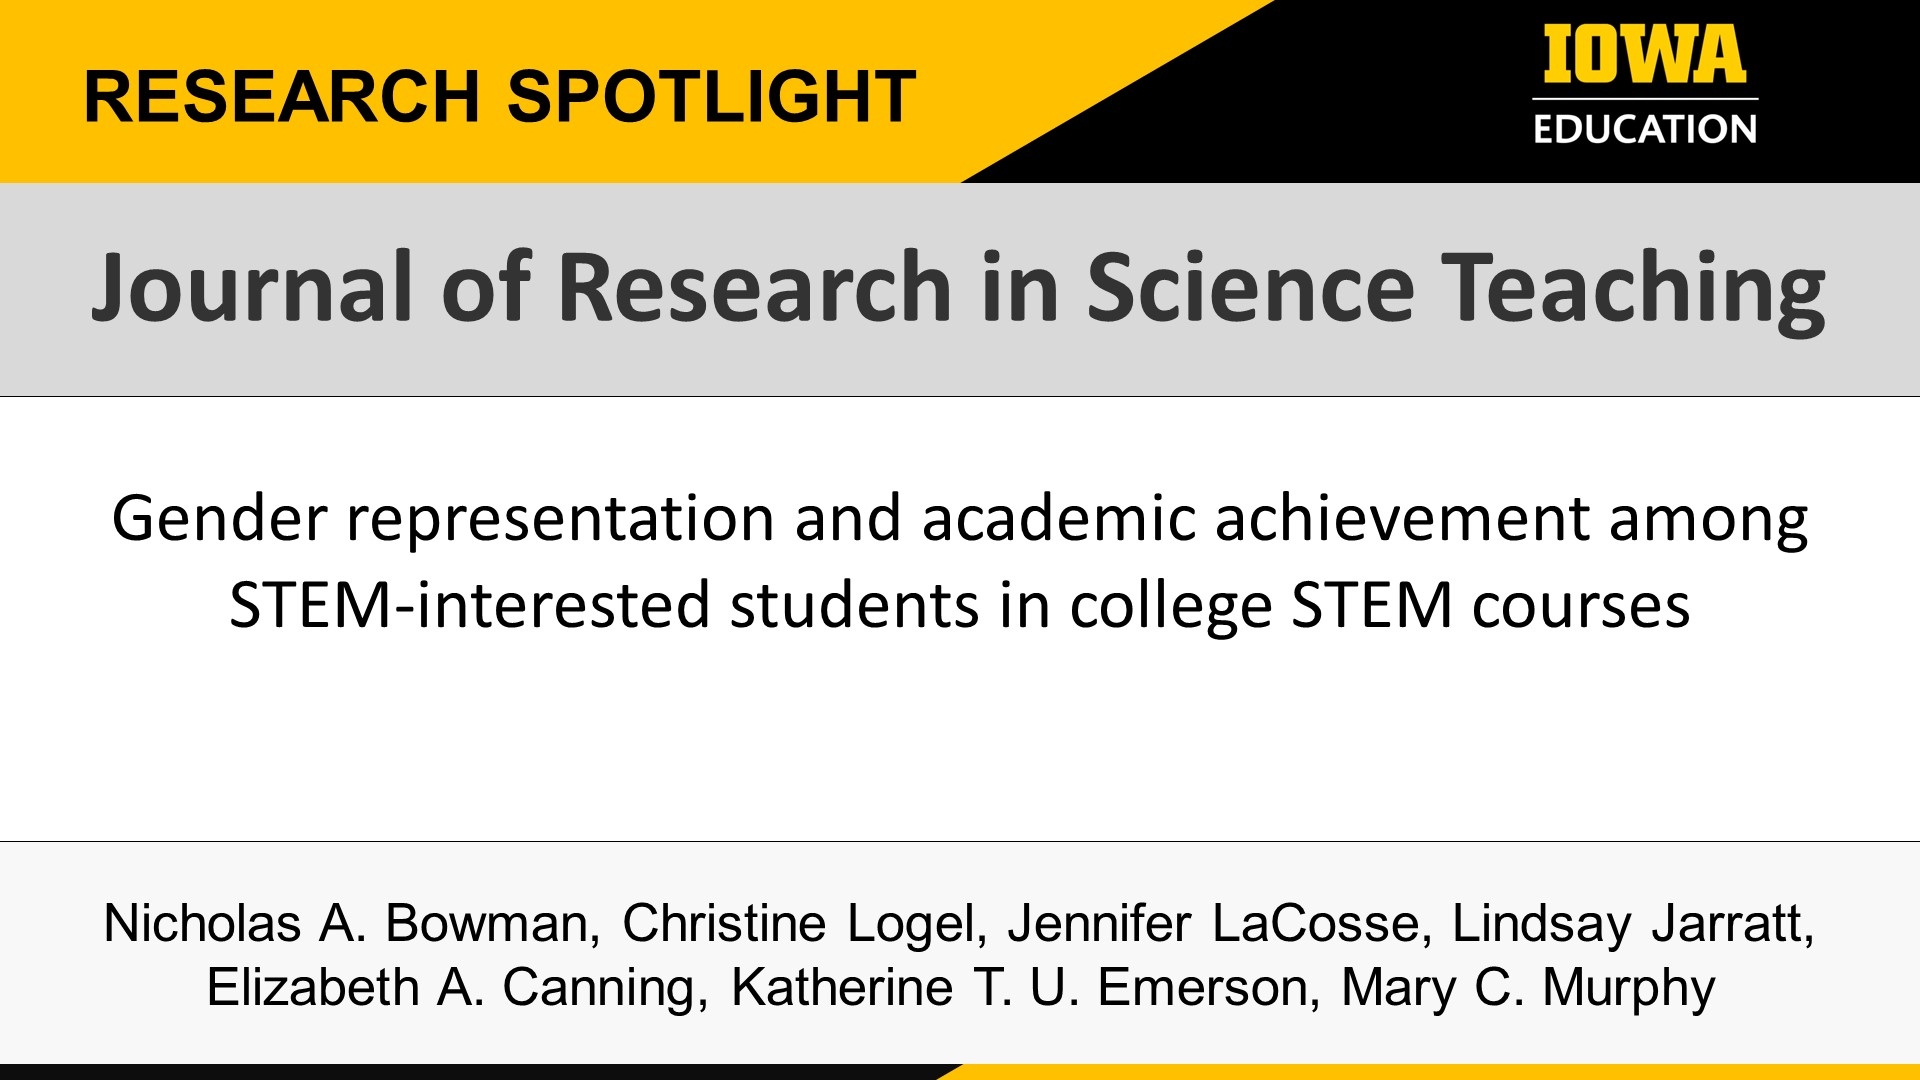 Research Spotlight: Gender representation and academic achievement among STEM-interested students in college STEM courses. In Journal of Research in Science Teaching.